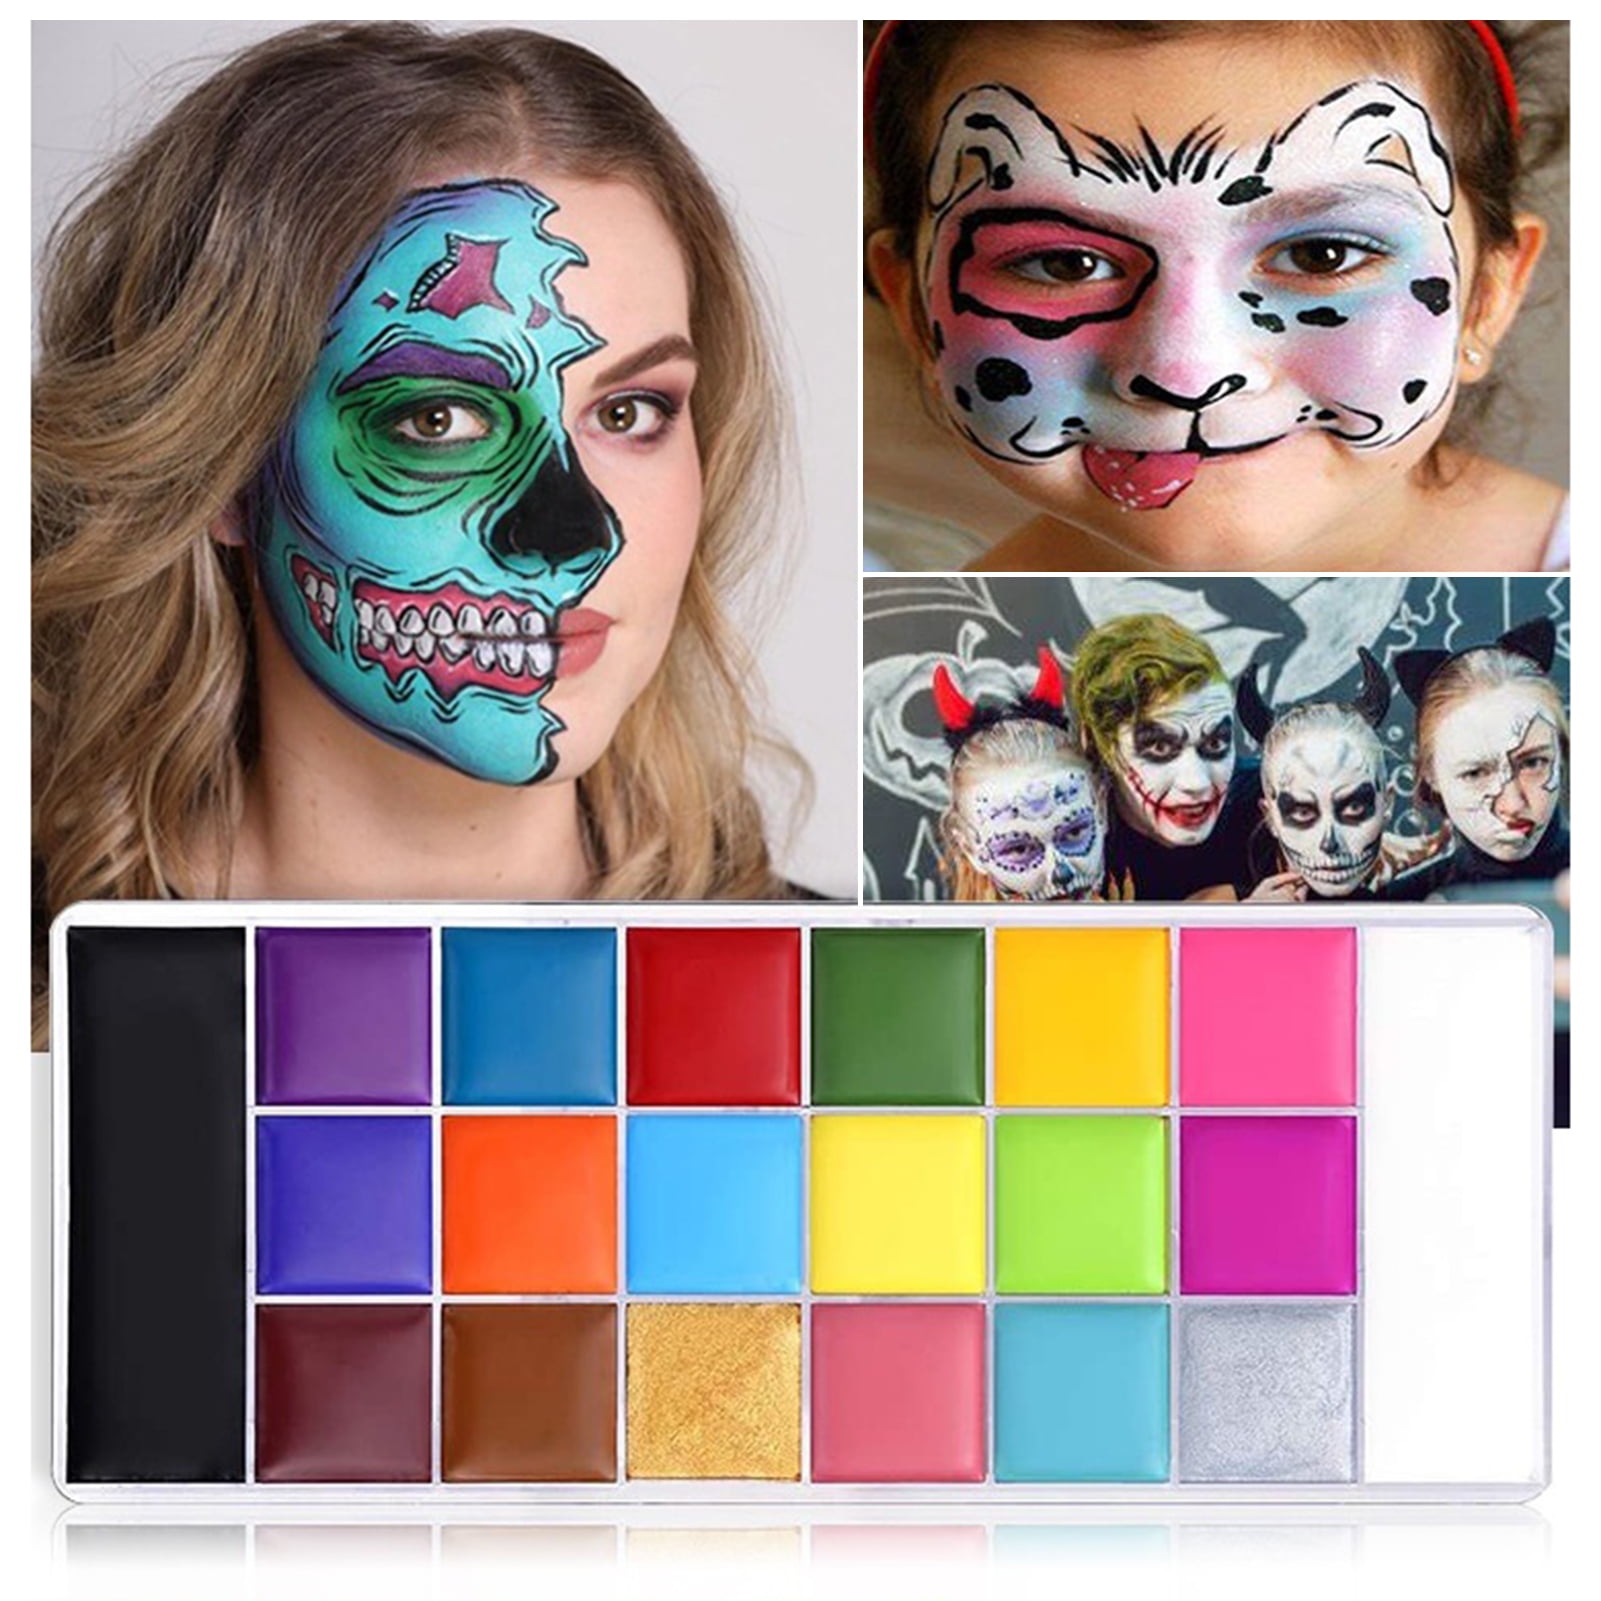  SOVONCARE Oil Based Face Paint Kit, Professional Face and Body  Paint 20 Colors, Face Painting Makeup Palette with 2 Brushes, Non Toxic  Safe for Halloween Cosplay SFX Party Special Effects